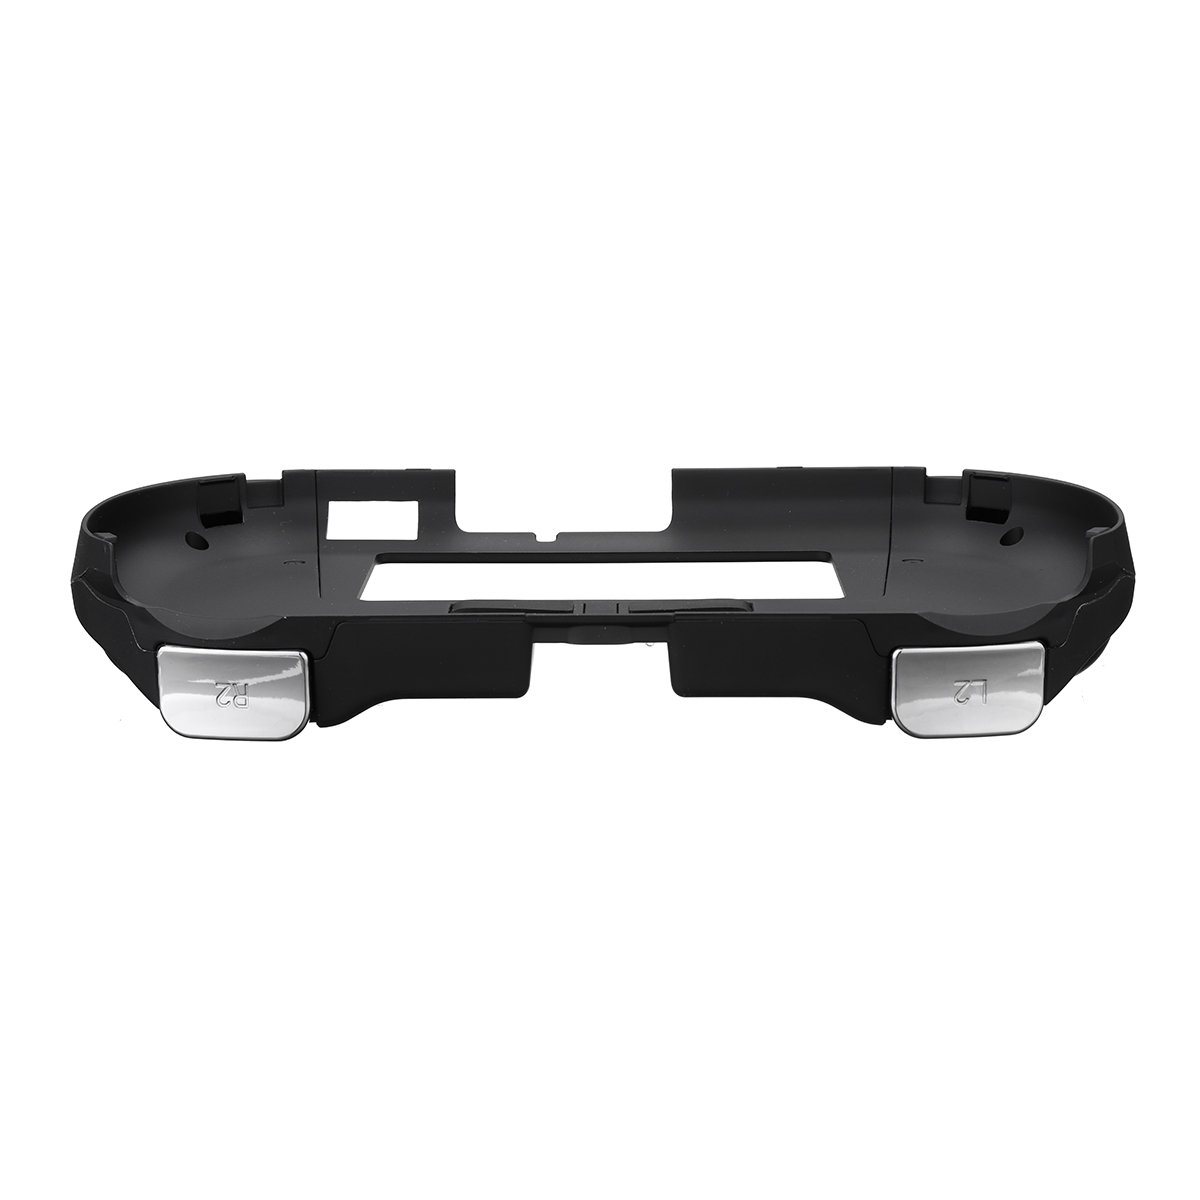 L2 R2 Trigger Grips Handle Shell Protective Case for Sony PlayStation PS Vita 2000 Game Console 12